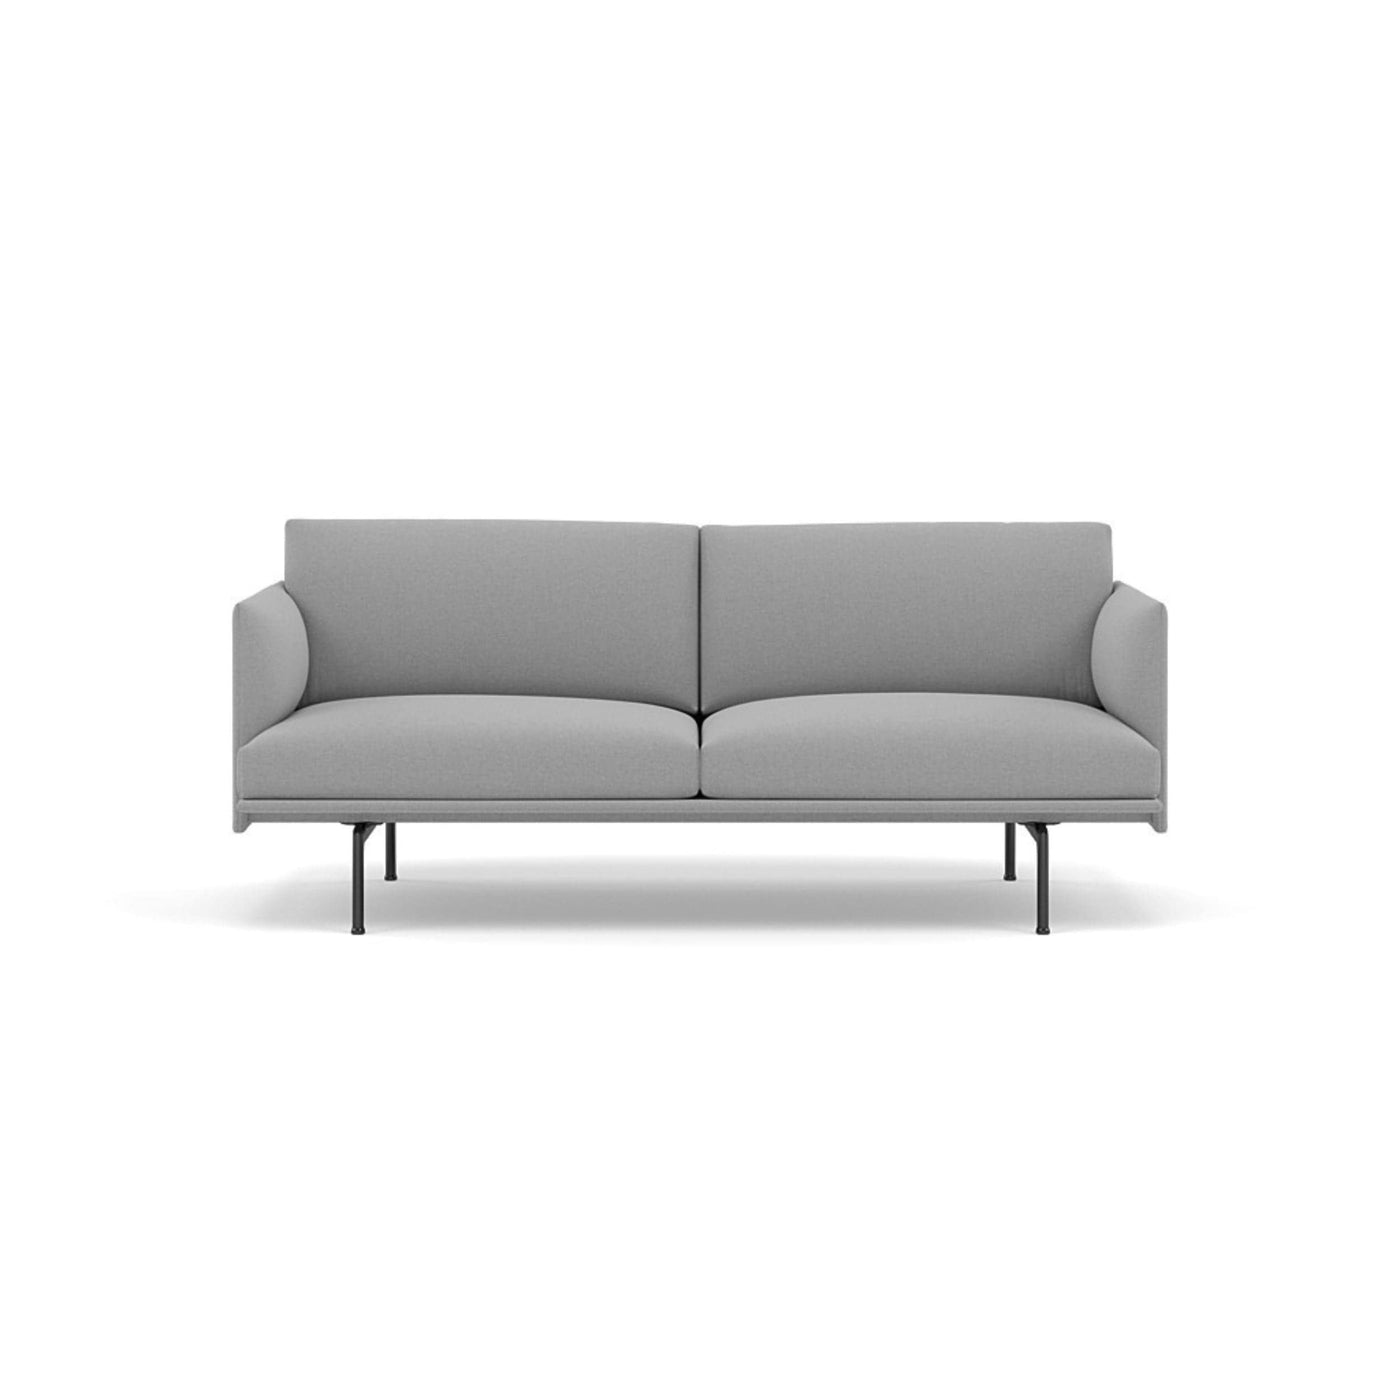 Muuto Outline Studio Sofa 170 in steelcut trio 133 and black legs. Made to order from someday designs. #colour_steelcut-trio-133